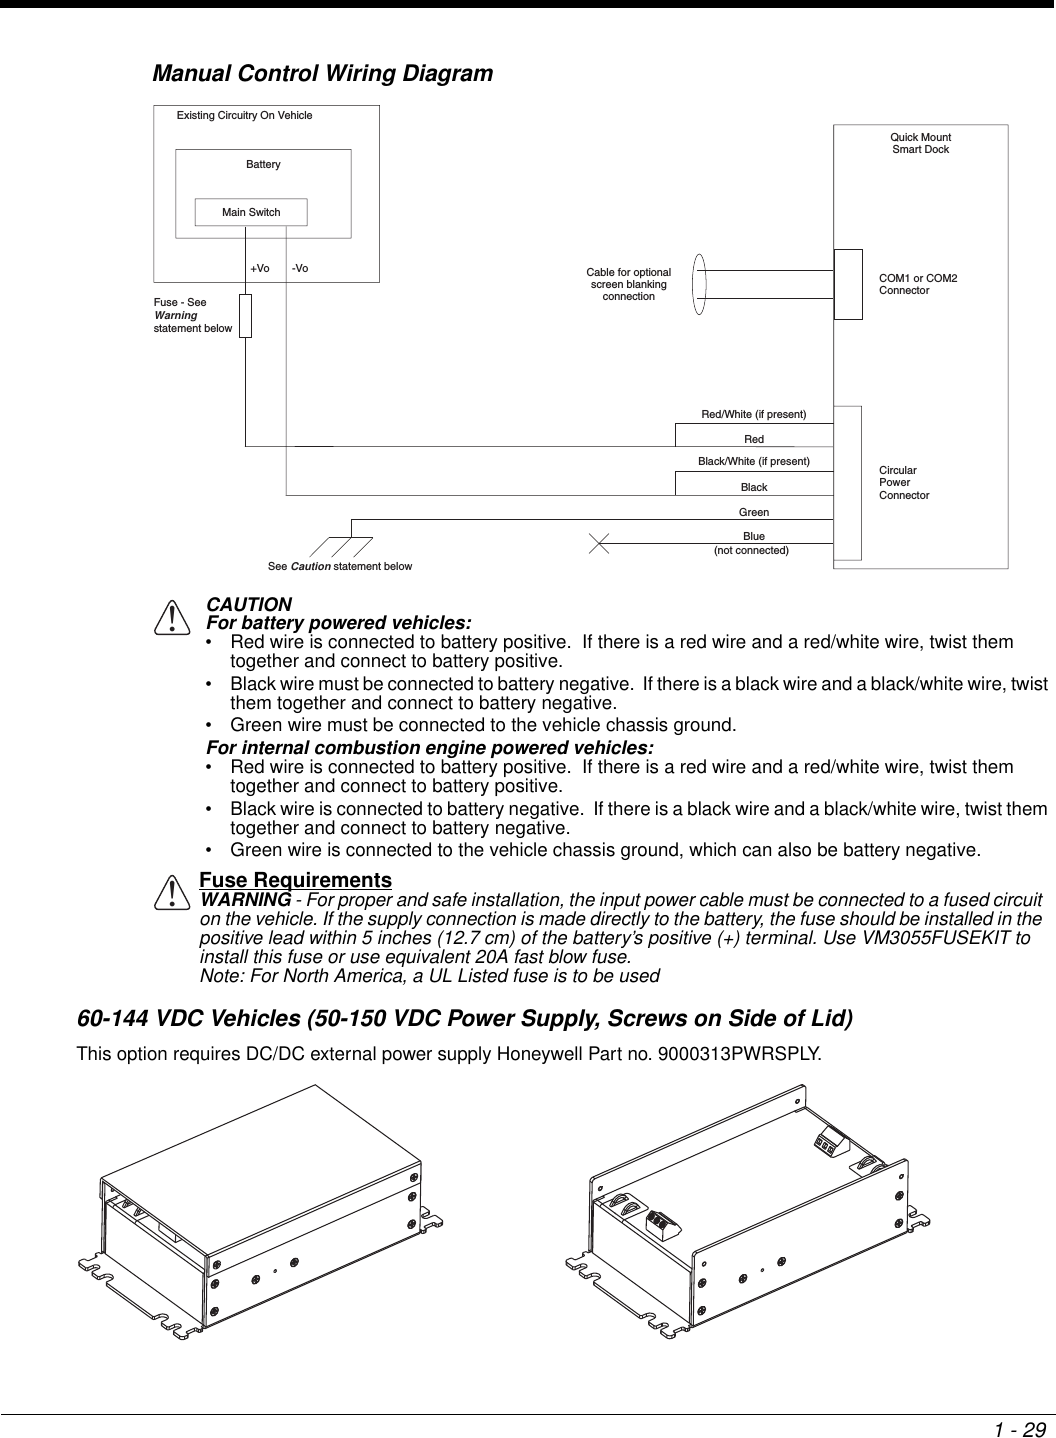 1 - 29Manual Control Wiring Diagram60-144 VDC Vehicles (50-150 VDC Power Supply, Screws on Side of Lid)This option requires DC/DC external power supply Honeywell Part no. 9000313PWRSPLY.CAUTIONFor battery powered vehicles:• Red wire is connected to battery positive.  If there is a red wire and a red/white wire, twist them together and connect to battery positive.• Black wire must be connected to battery negative.  If there is a black wire and a black/white wire, twist them together and connect to battery negative.• Green wire must be connected to the vehicle chassis ground.For internal combustion engine powered vehicles:• Red wire is connected to battery positive.  If there is a red wire and a red/white wire, twist them together and connect to battery positive.• Black wire is connected to battery negative.  If there is a black wire and a black/white wire, twist them together and connect to battery negative.• Green wire is connected to the vehicle chassis ground, which can also be battery negative.Fuse RequirementsWARNING - For proper and safe installation, the input power cable must be connected to a fused circuit on the vehicle. If the supply connection is made directly to the battery, the fuse should be installed in the positive lead within 5 inches (12.7 cm) of the battery’s positive (+) terminal. Use VM3055FUSEKIT to install this fuse or use equivalent 20A fast blow fuse.Note: For North America, a UL Listed fuse is to be usedQuick MountSmart DockCircularPowerConnectorCOM1 or COM2ConnectorExisting Circuitry On VehicleBatteryMain Switch-Vo+Vo Cable for optionalscreen blankingconnectionSee Caution statement belowFuse - SeeWarning statement below (not connected)RedBlackGreenBlueRed/White (if present)Black/White (if present)!!